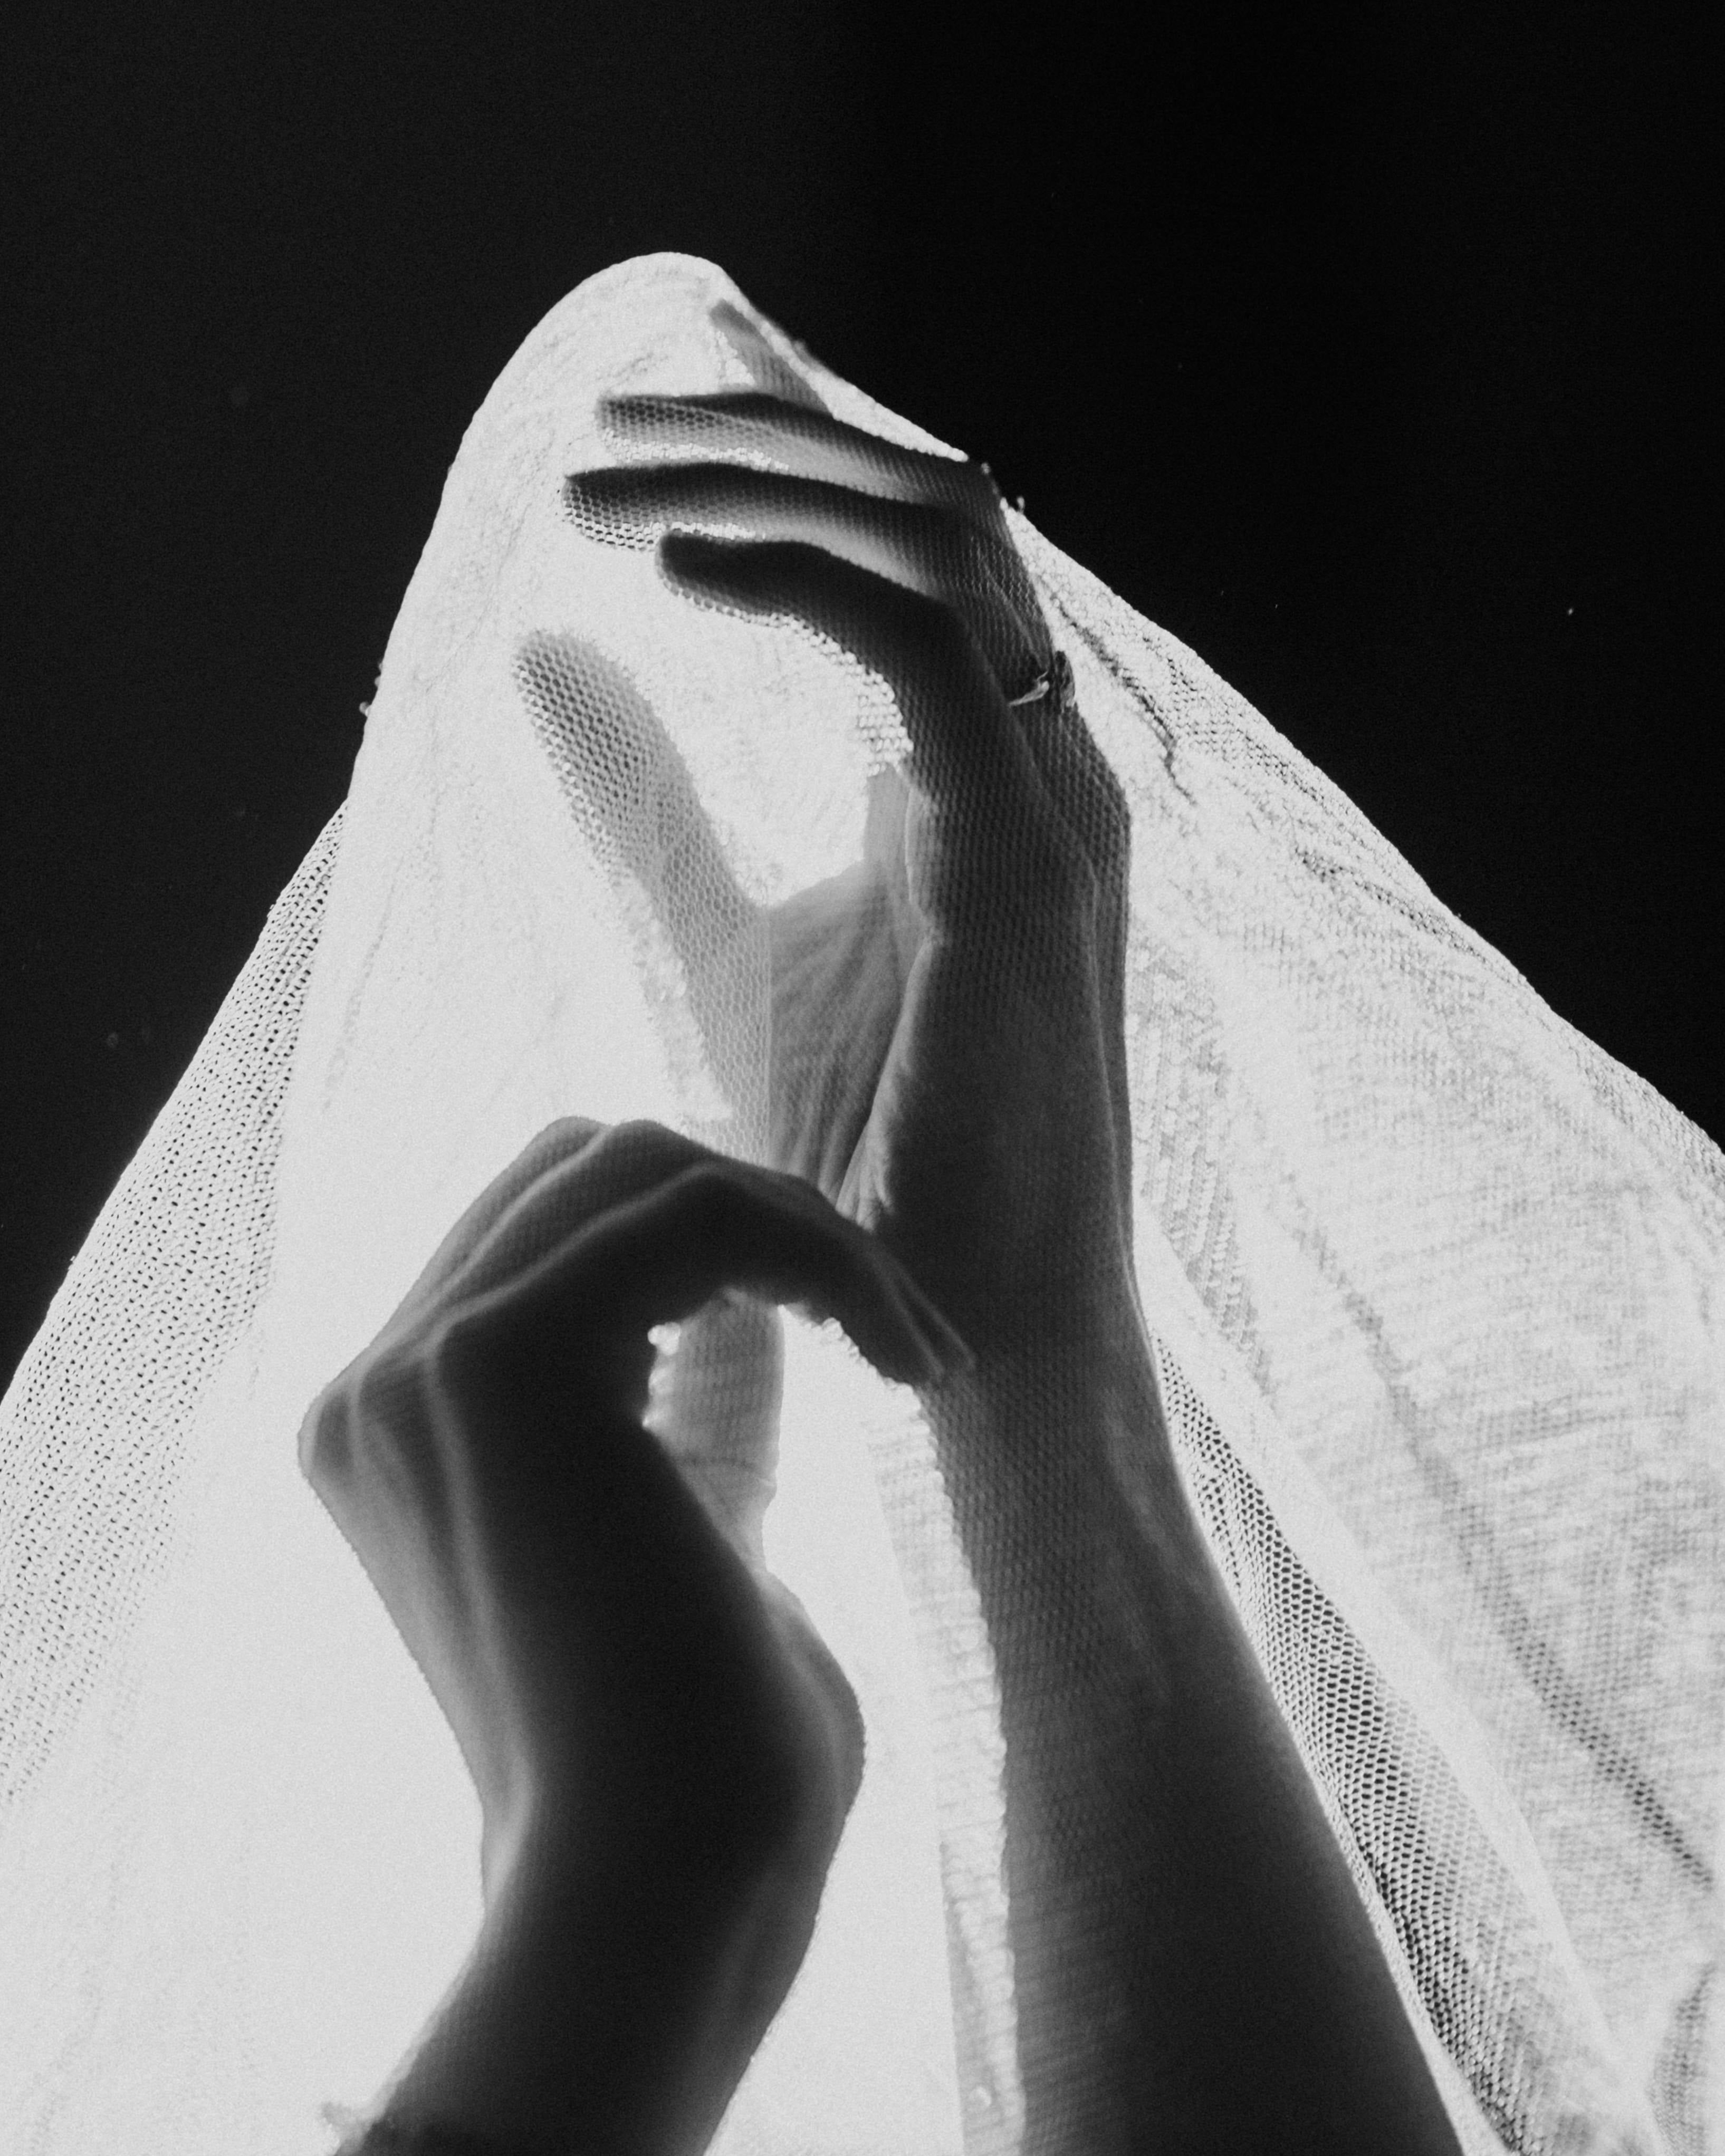 A black and white photo of two hands reaching upwards wearing rings and are covered in a transparent white veil.